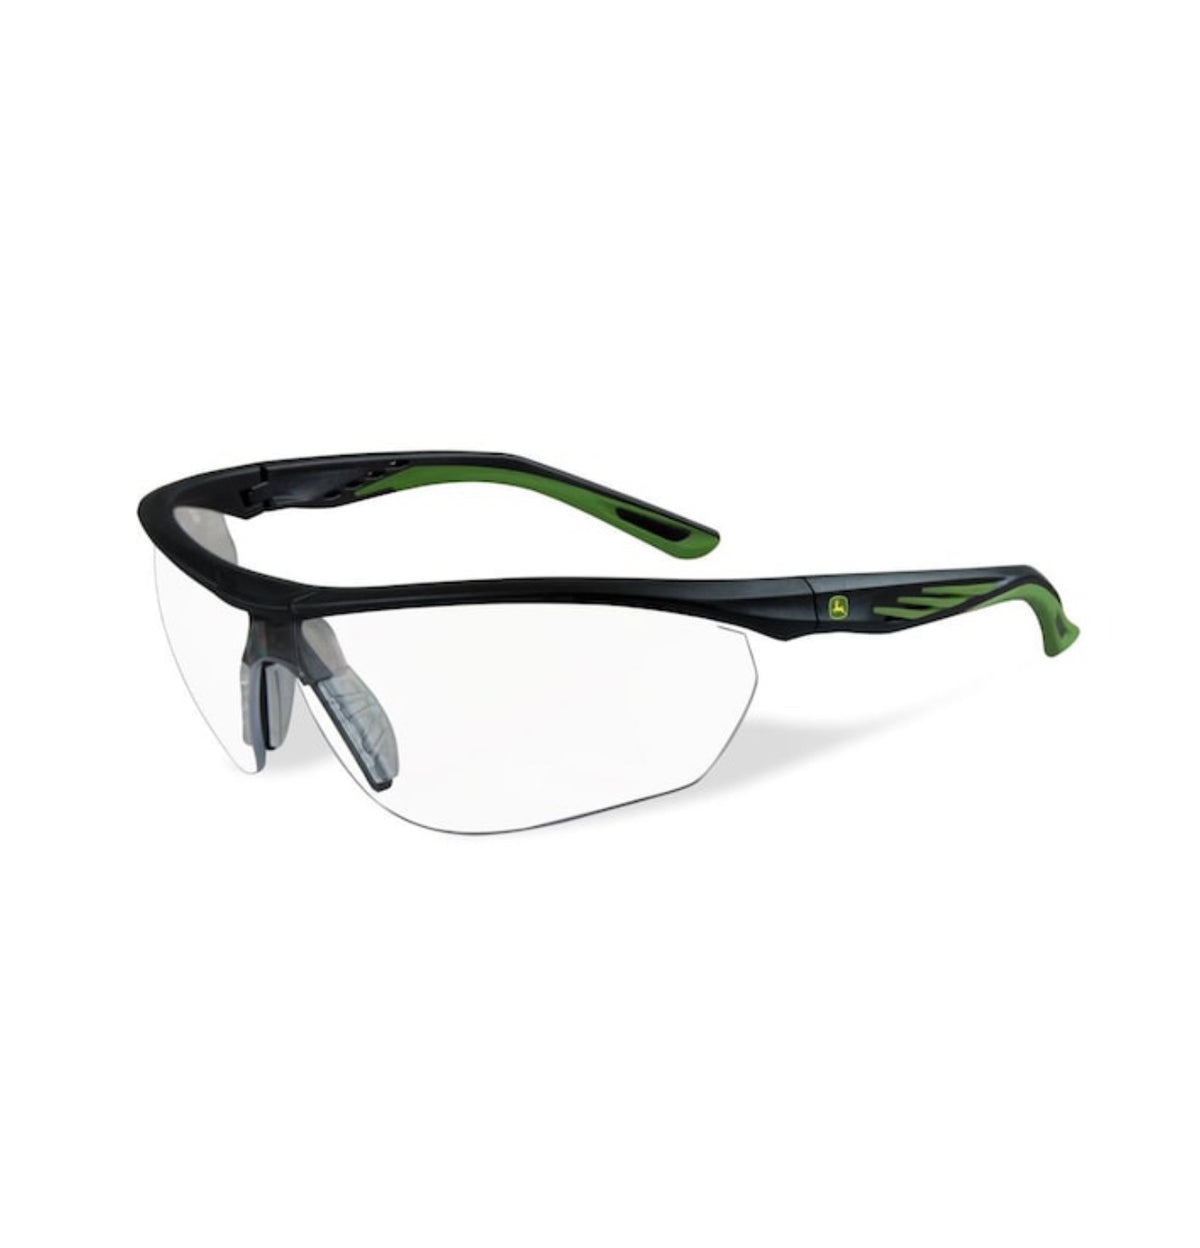 John Deere Safety Glasses by Wiley X - Clear